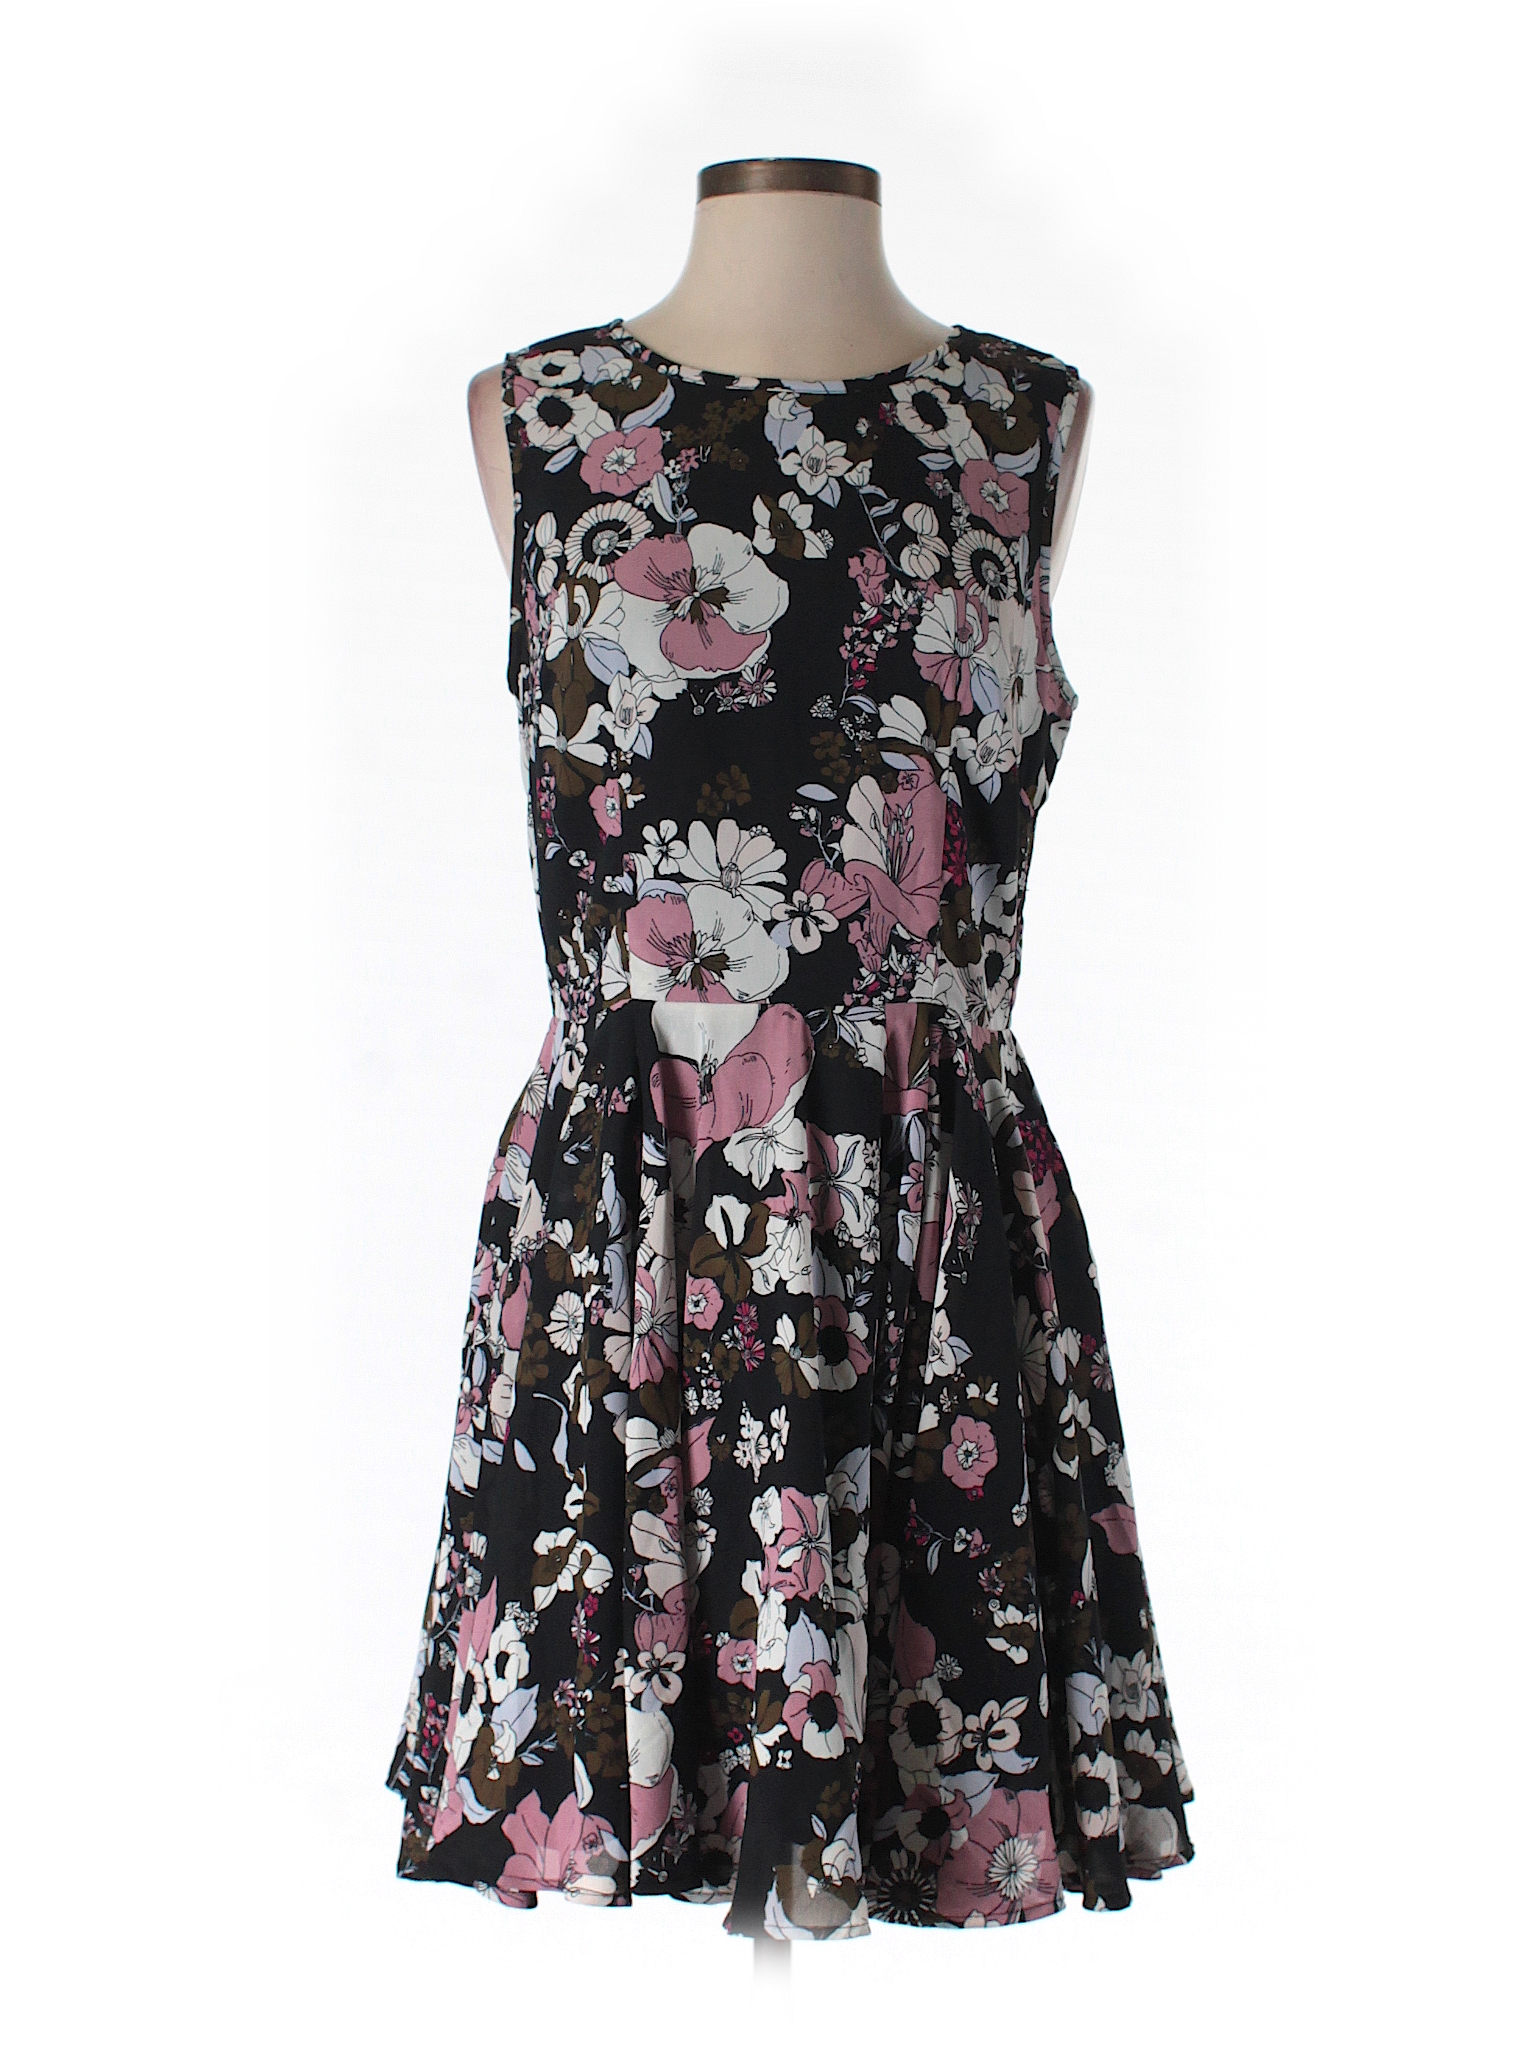 Maison Jules 100% Polyester Print Black Casual Dress Size M - 65% off ...